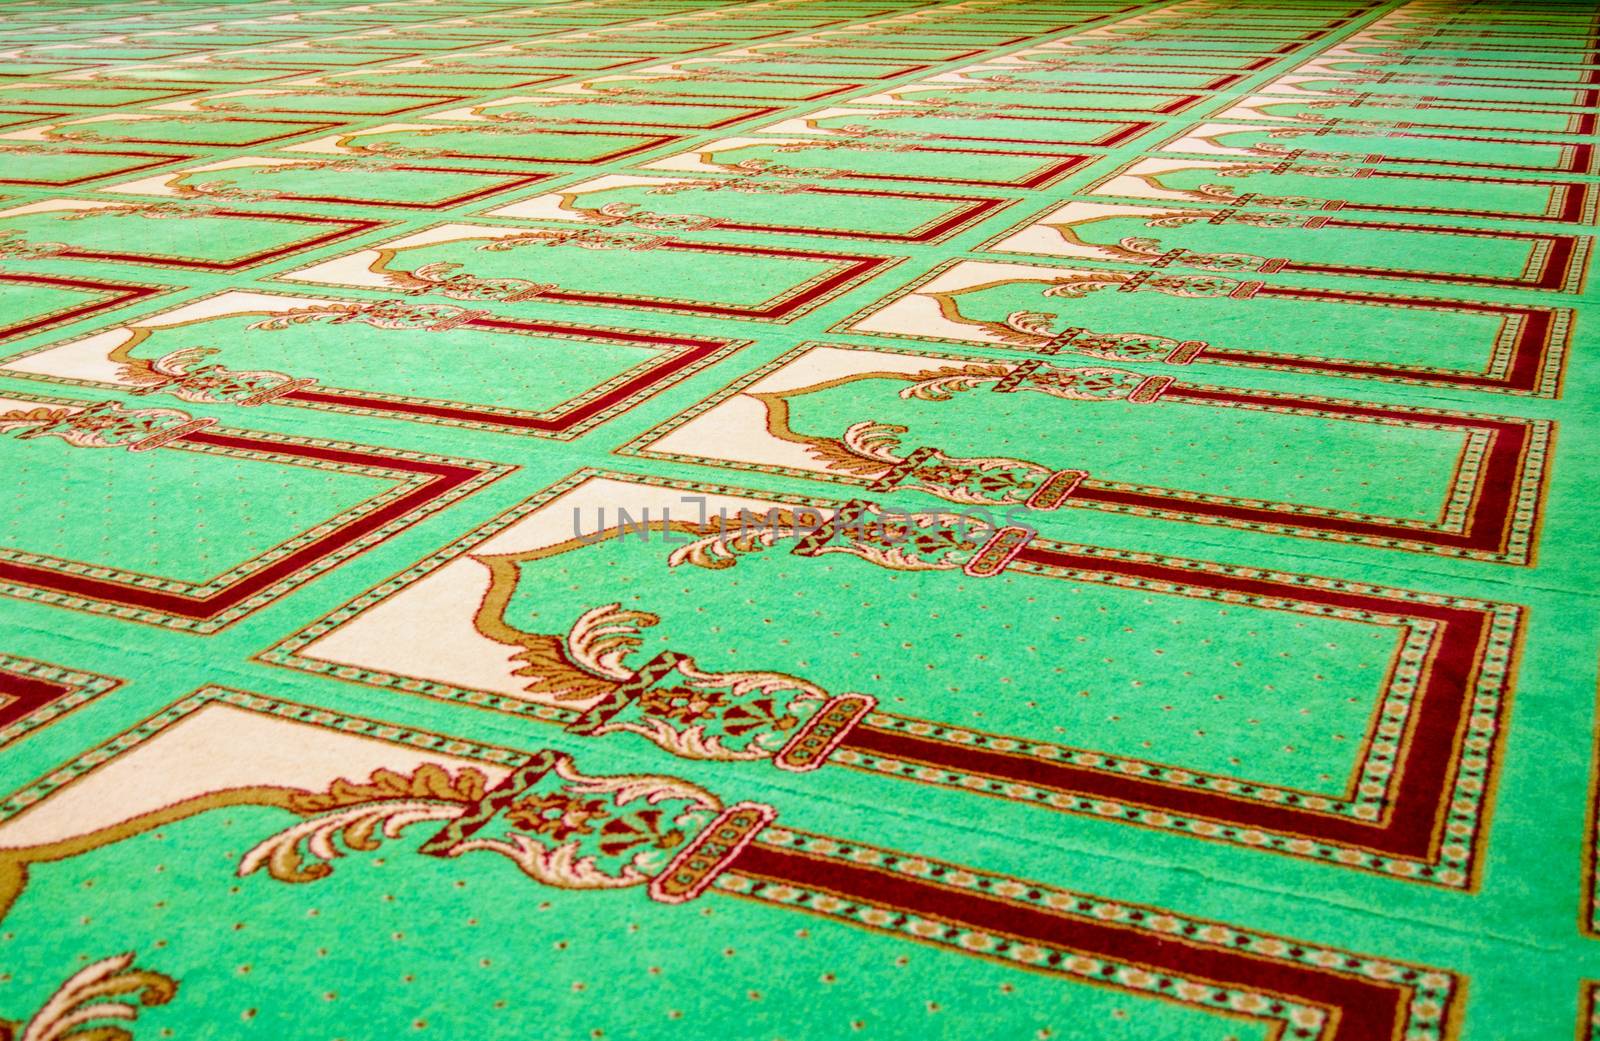 Carpet with arches designed to point towards Mecca in a mosque.